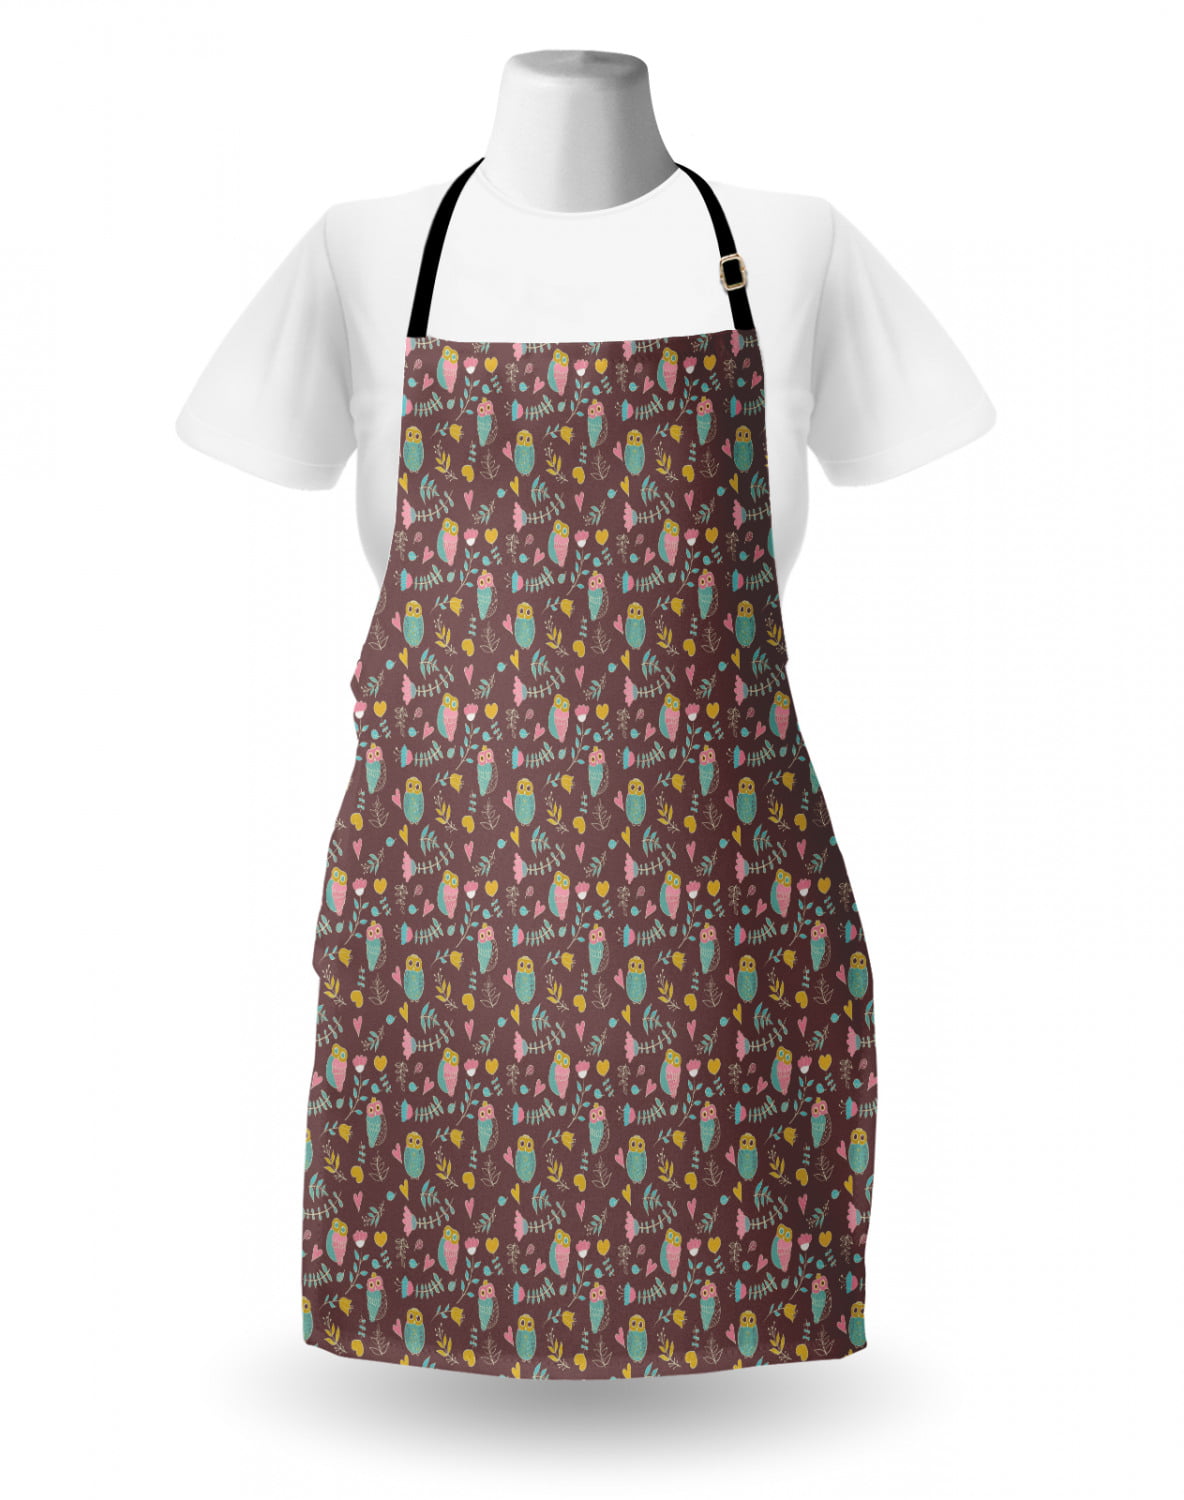 Details about   Standard Size Apron Bib with Adjustable Neck for Gardening Cooking Ambesonne 